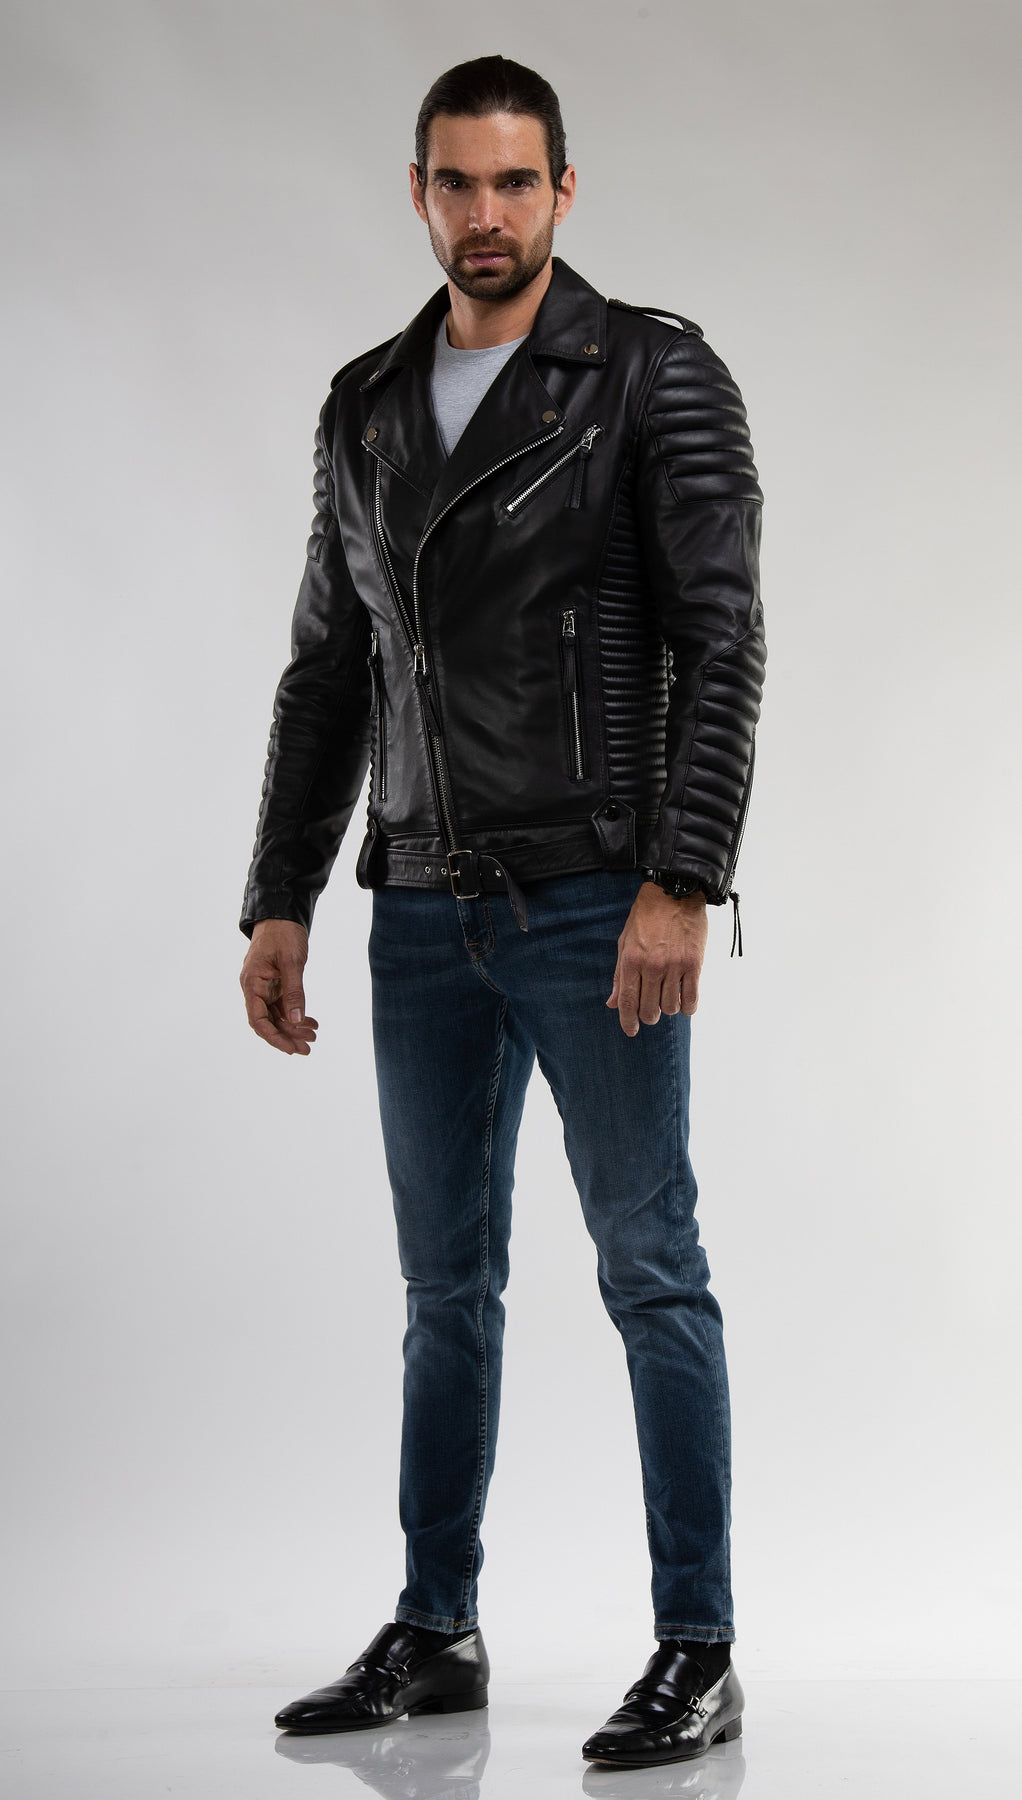 Mens Black Leather Moto Jacket | Heavy Duty Chrome Zippers and Buttons ...